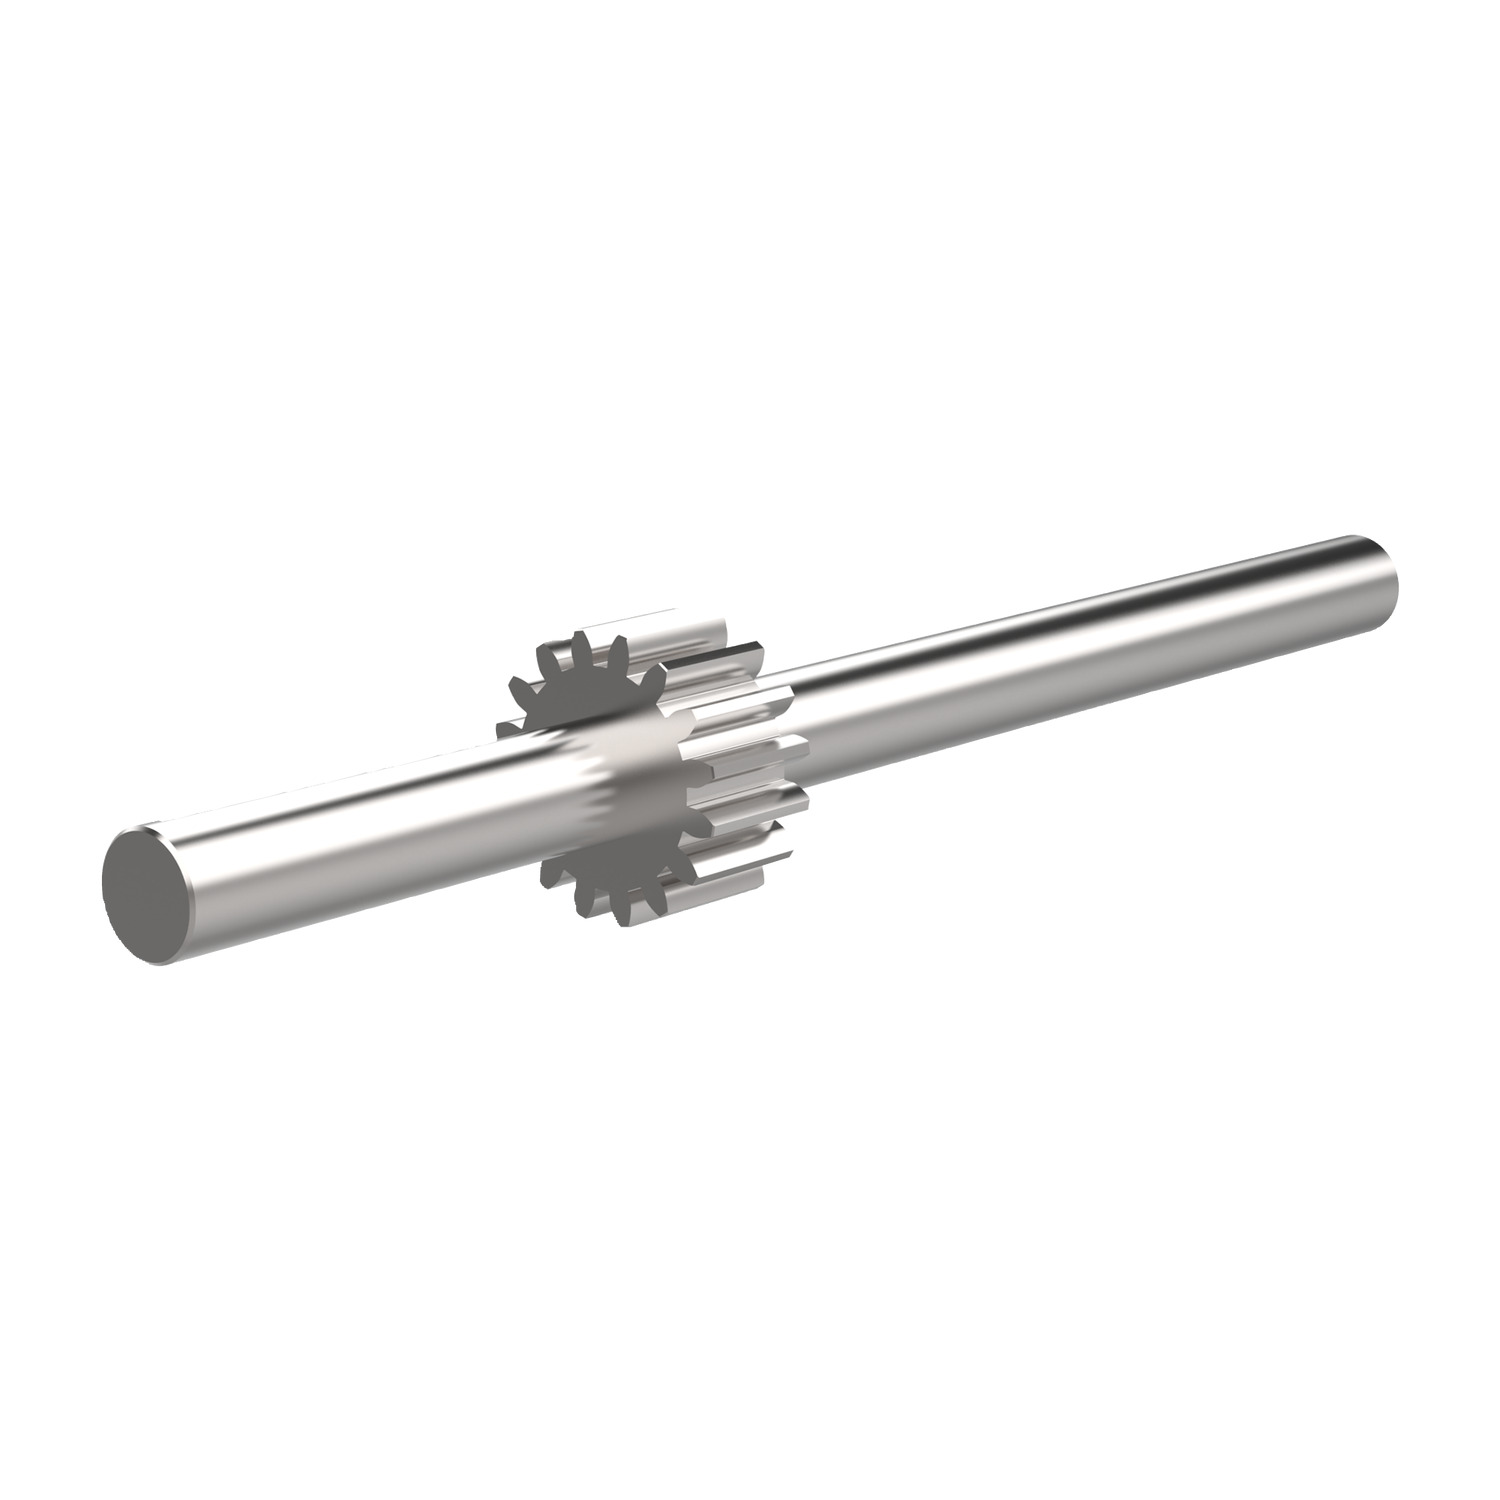 R5144 - Spur Gears - Module 0.8 - Stainless